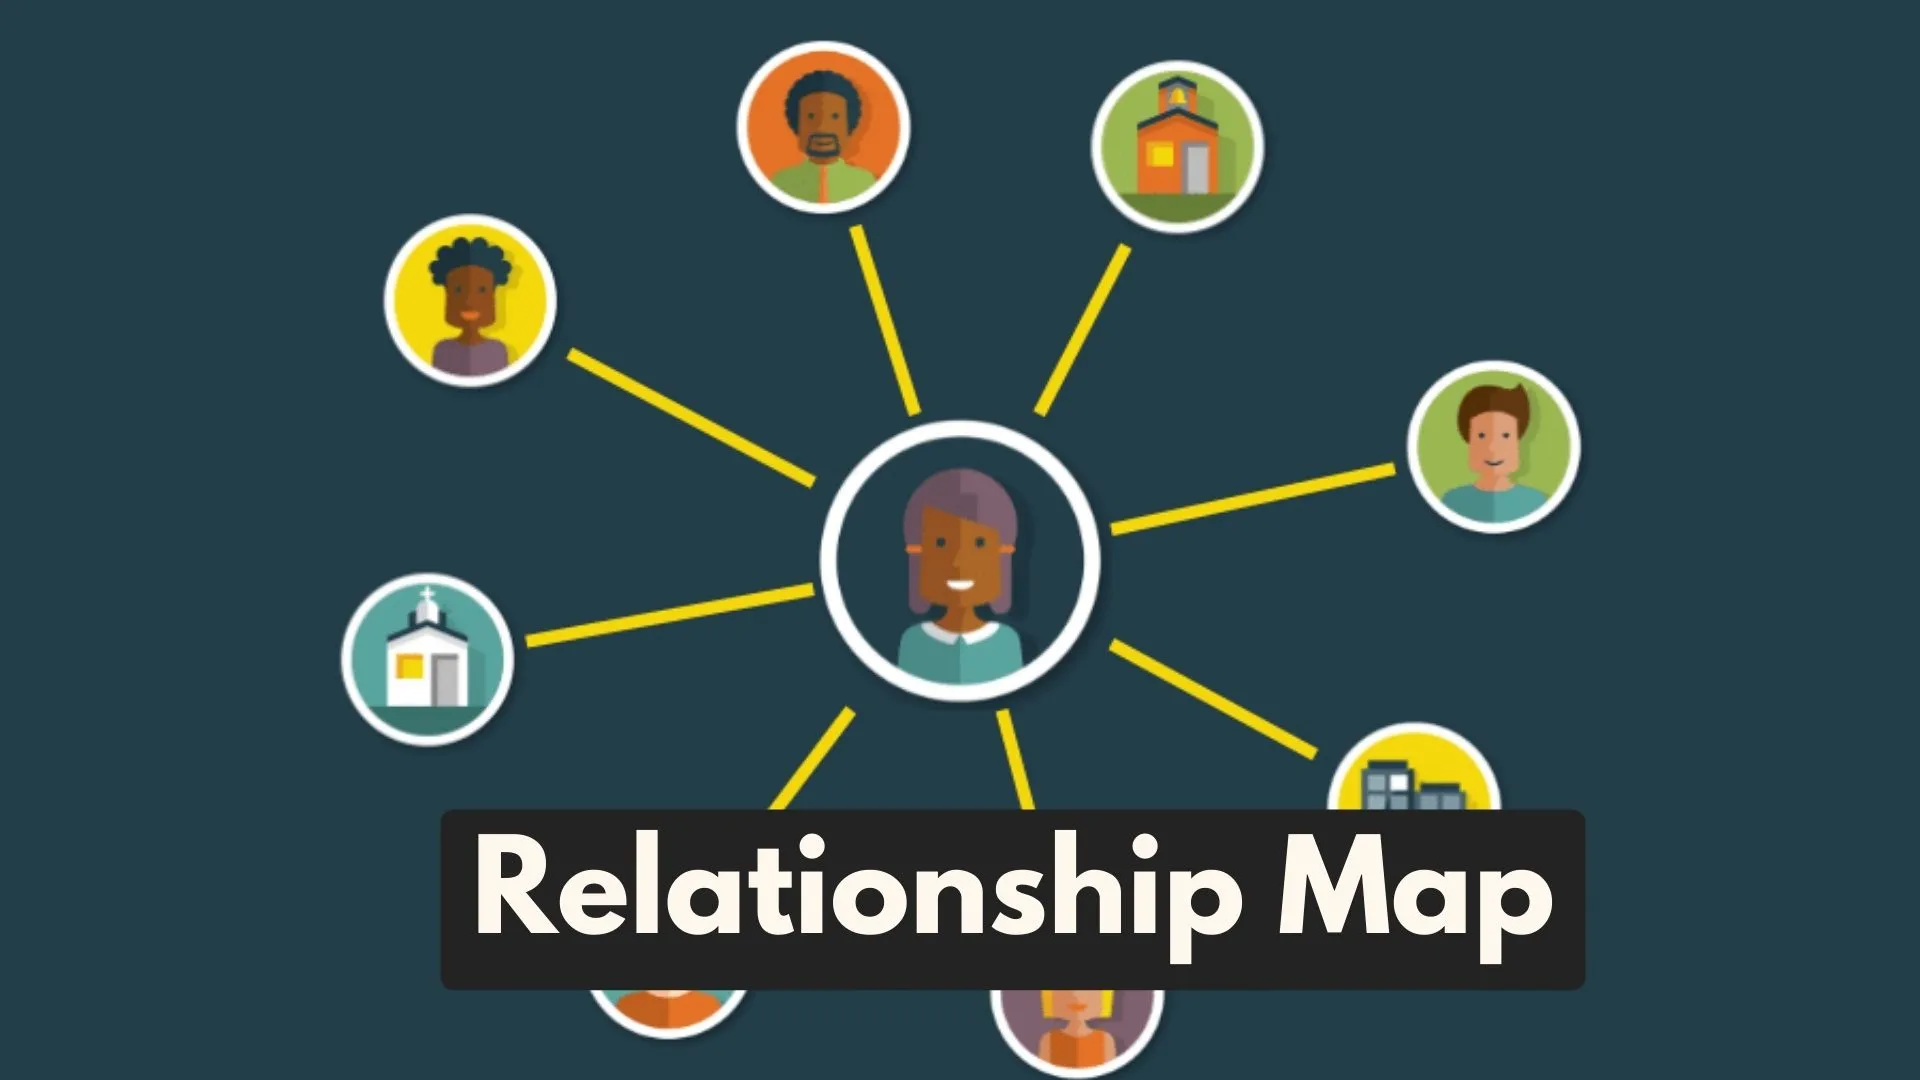 What Is a Relationship Map and How Can It Help Your Business?